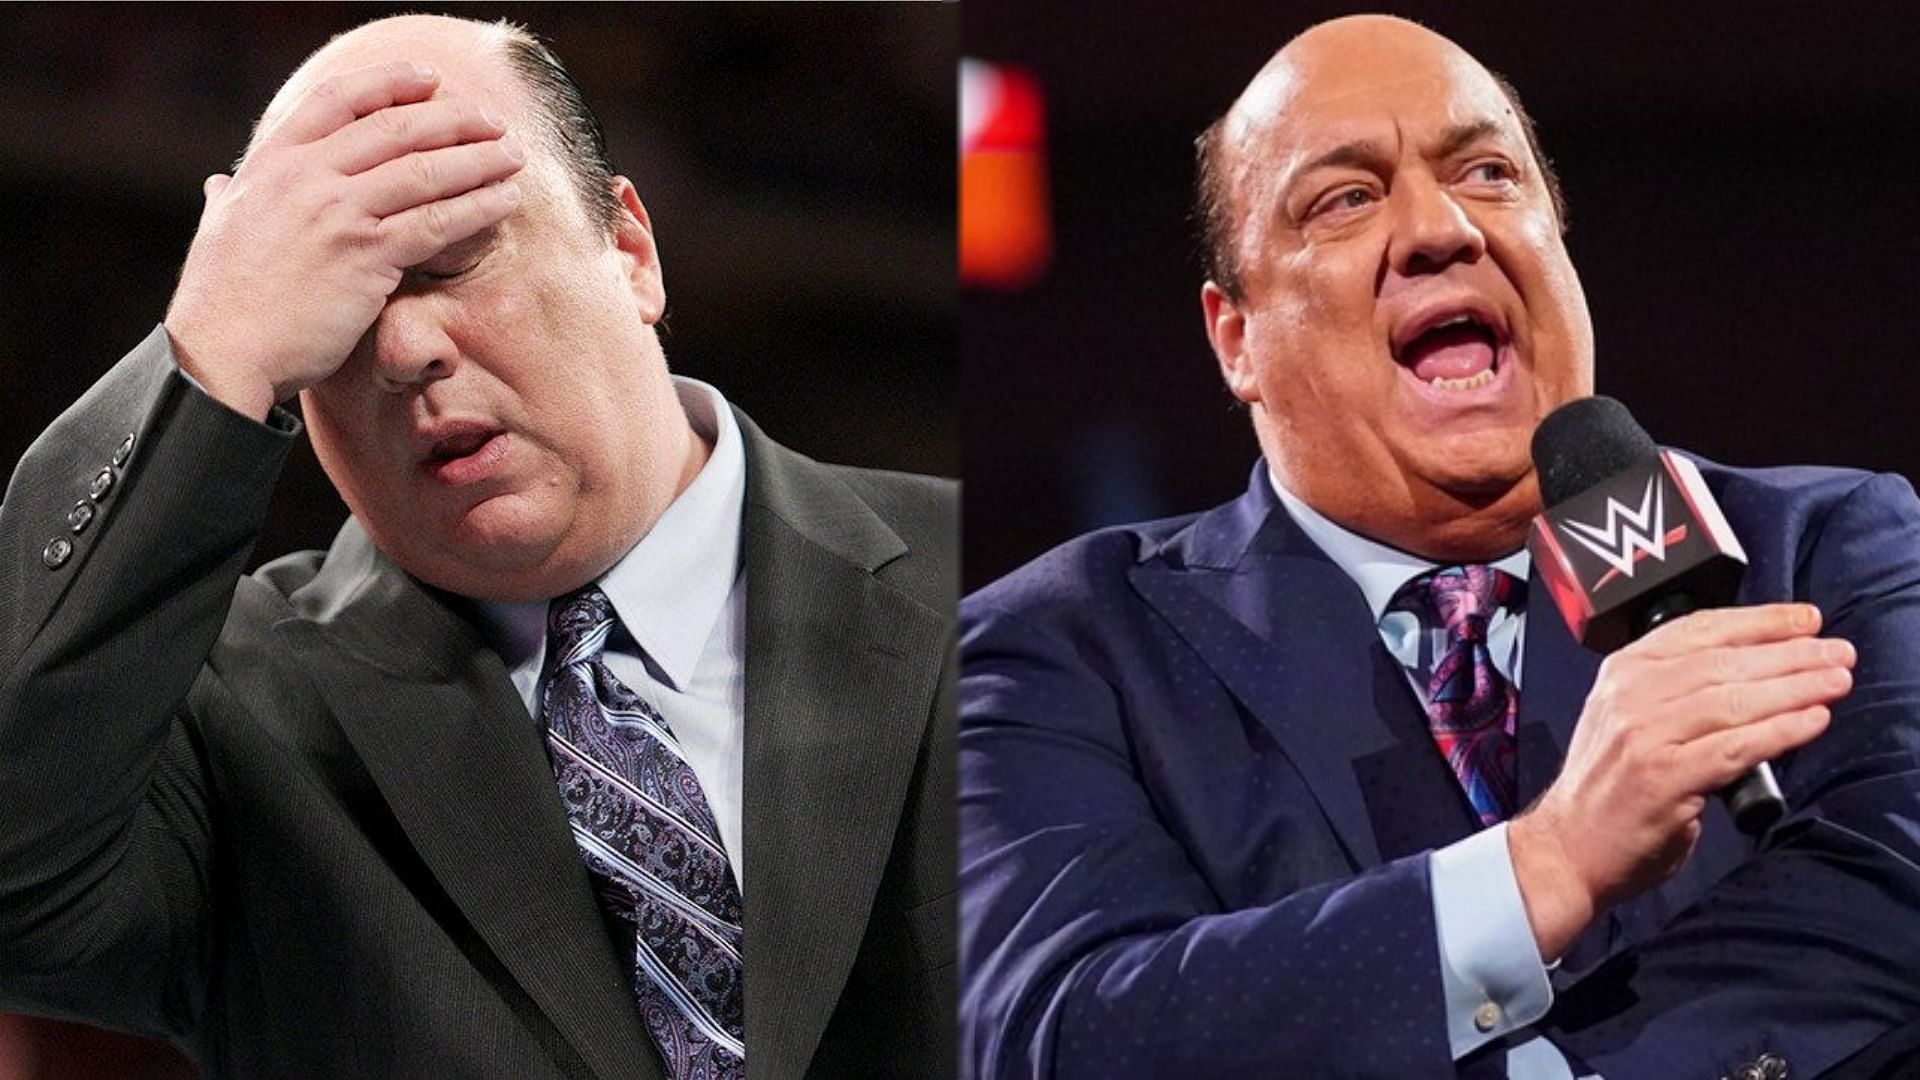 Paul Heyman has worked with some of the biggest names in the industry.